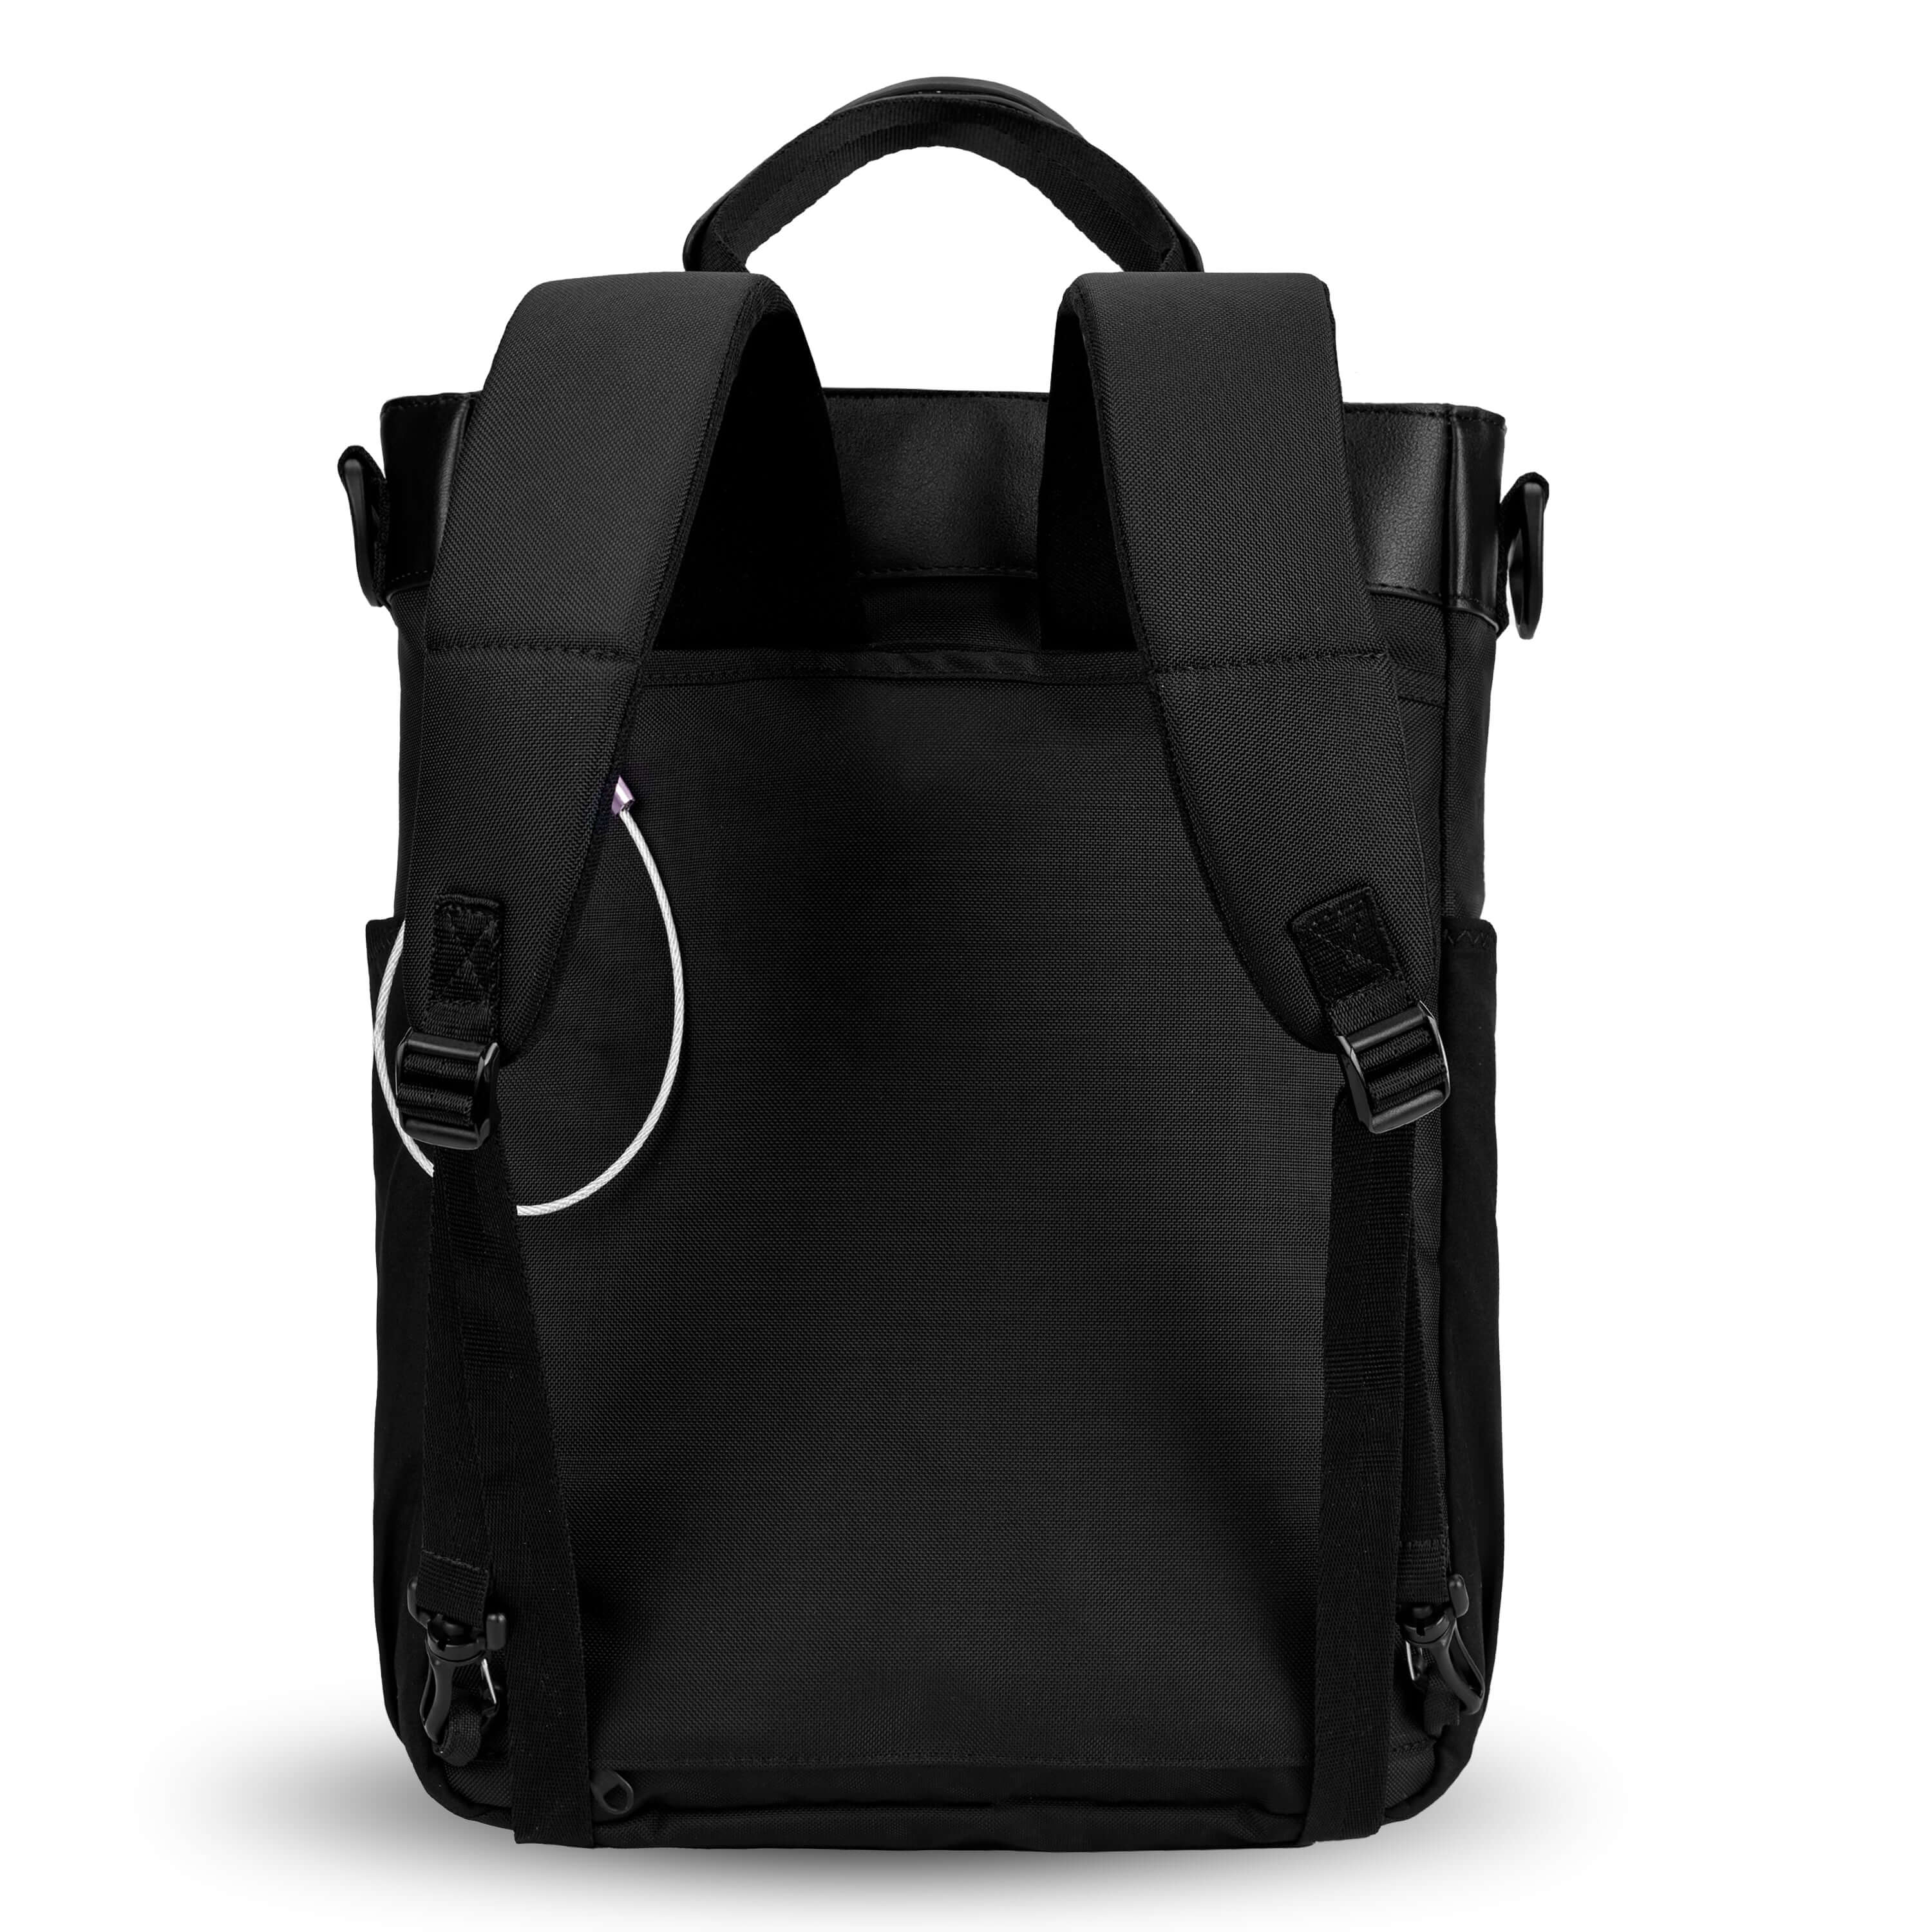 Flat view of the back of Sherpani’s Anti-Theft bag, the Soleil AT. The back is entirely black, and has vegan leather accents in black. Two elastic water bottle holders sit on either side of the bag. A chair lock loop is clipped to the upper left side. There is an external sleeve with a zipper at the bottom, which creates the luggage pass-through or trolley sleeve. It has padded backpack straps, short tote handles, and a place to attach a crossbody strap. 